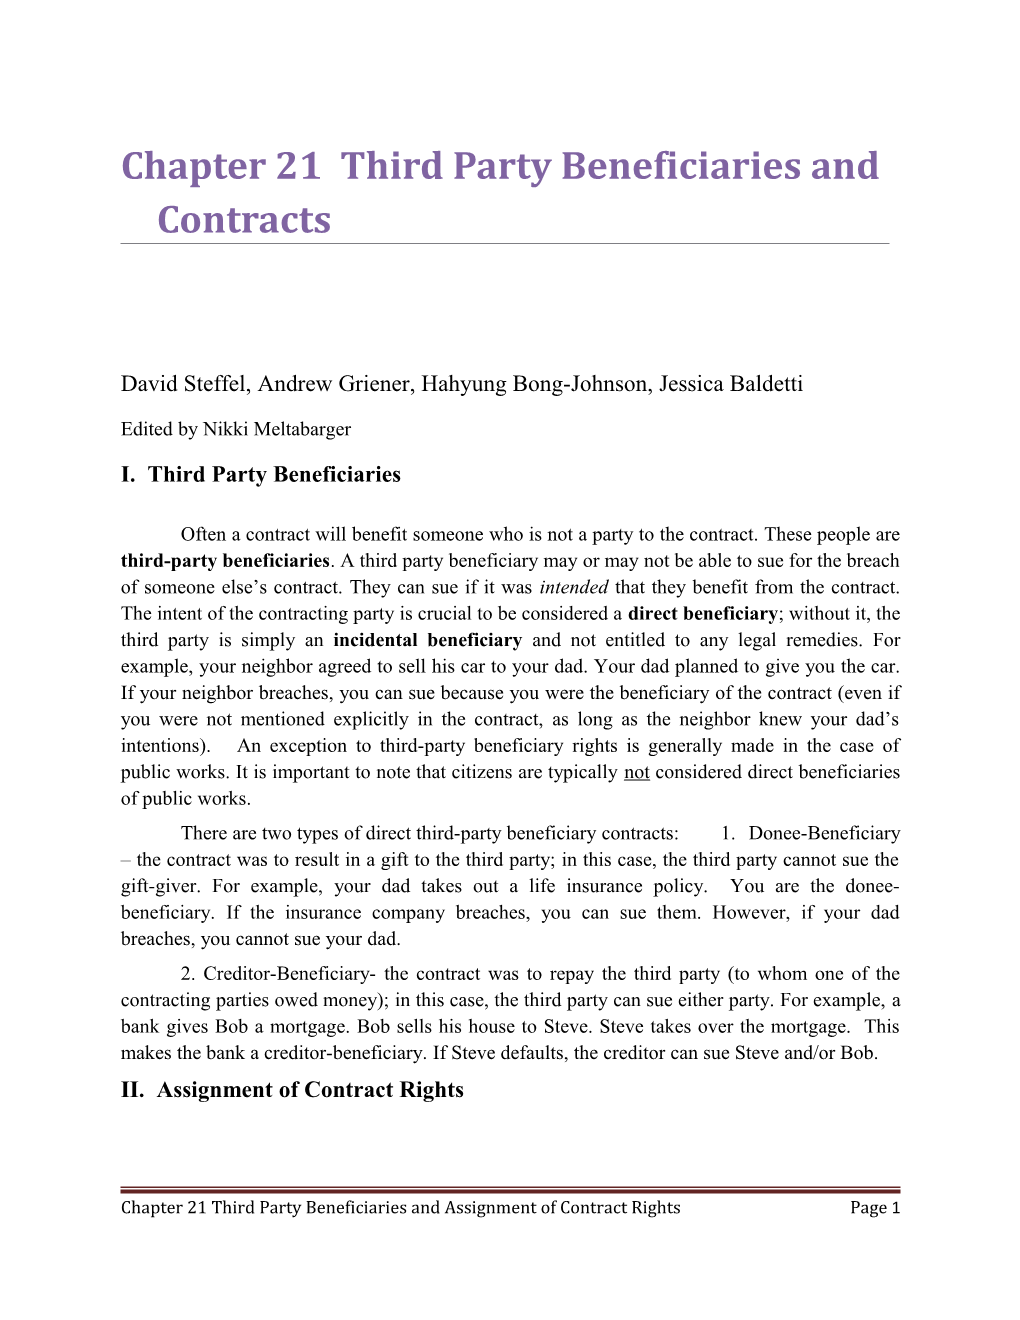 Chapter 21 Third Party Beneficiariesand Contracts